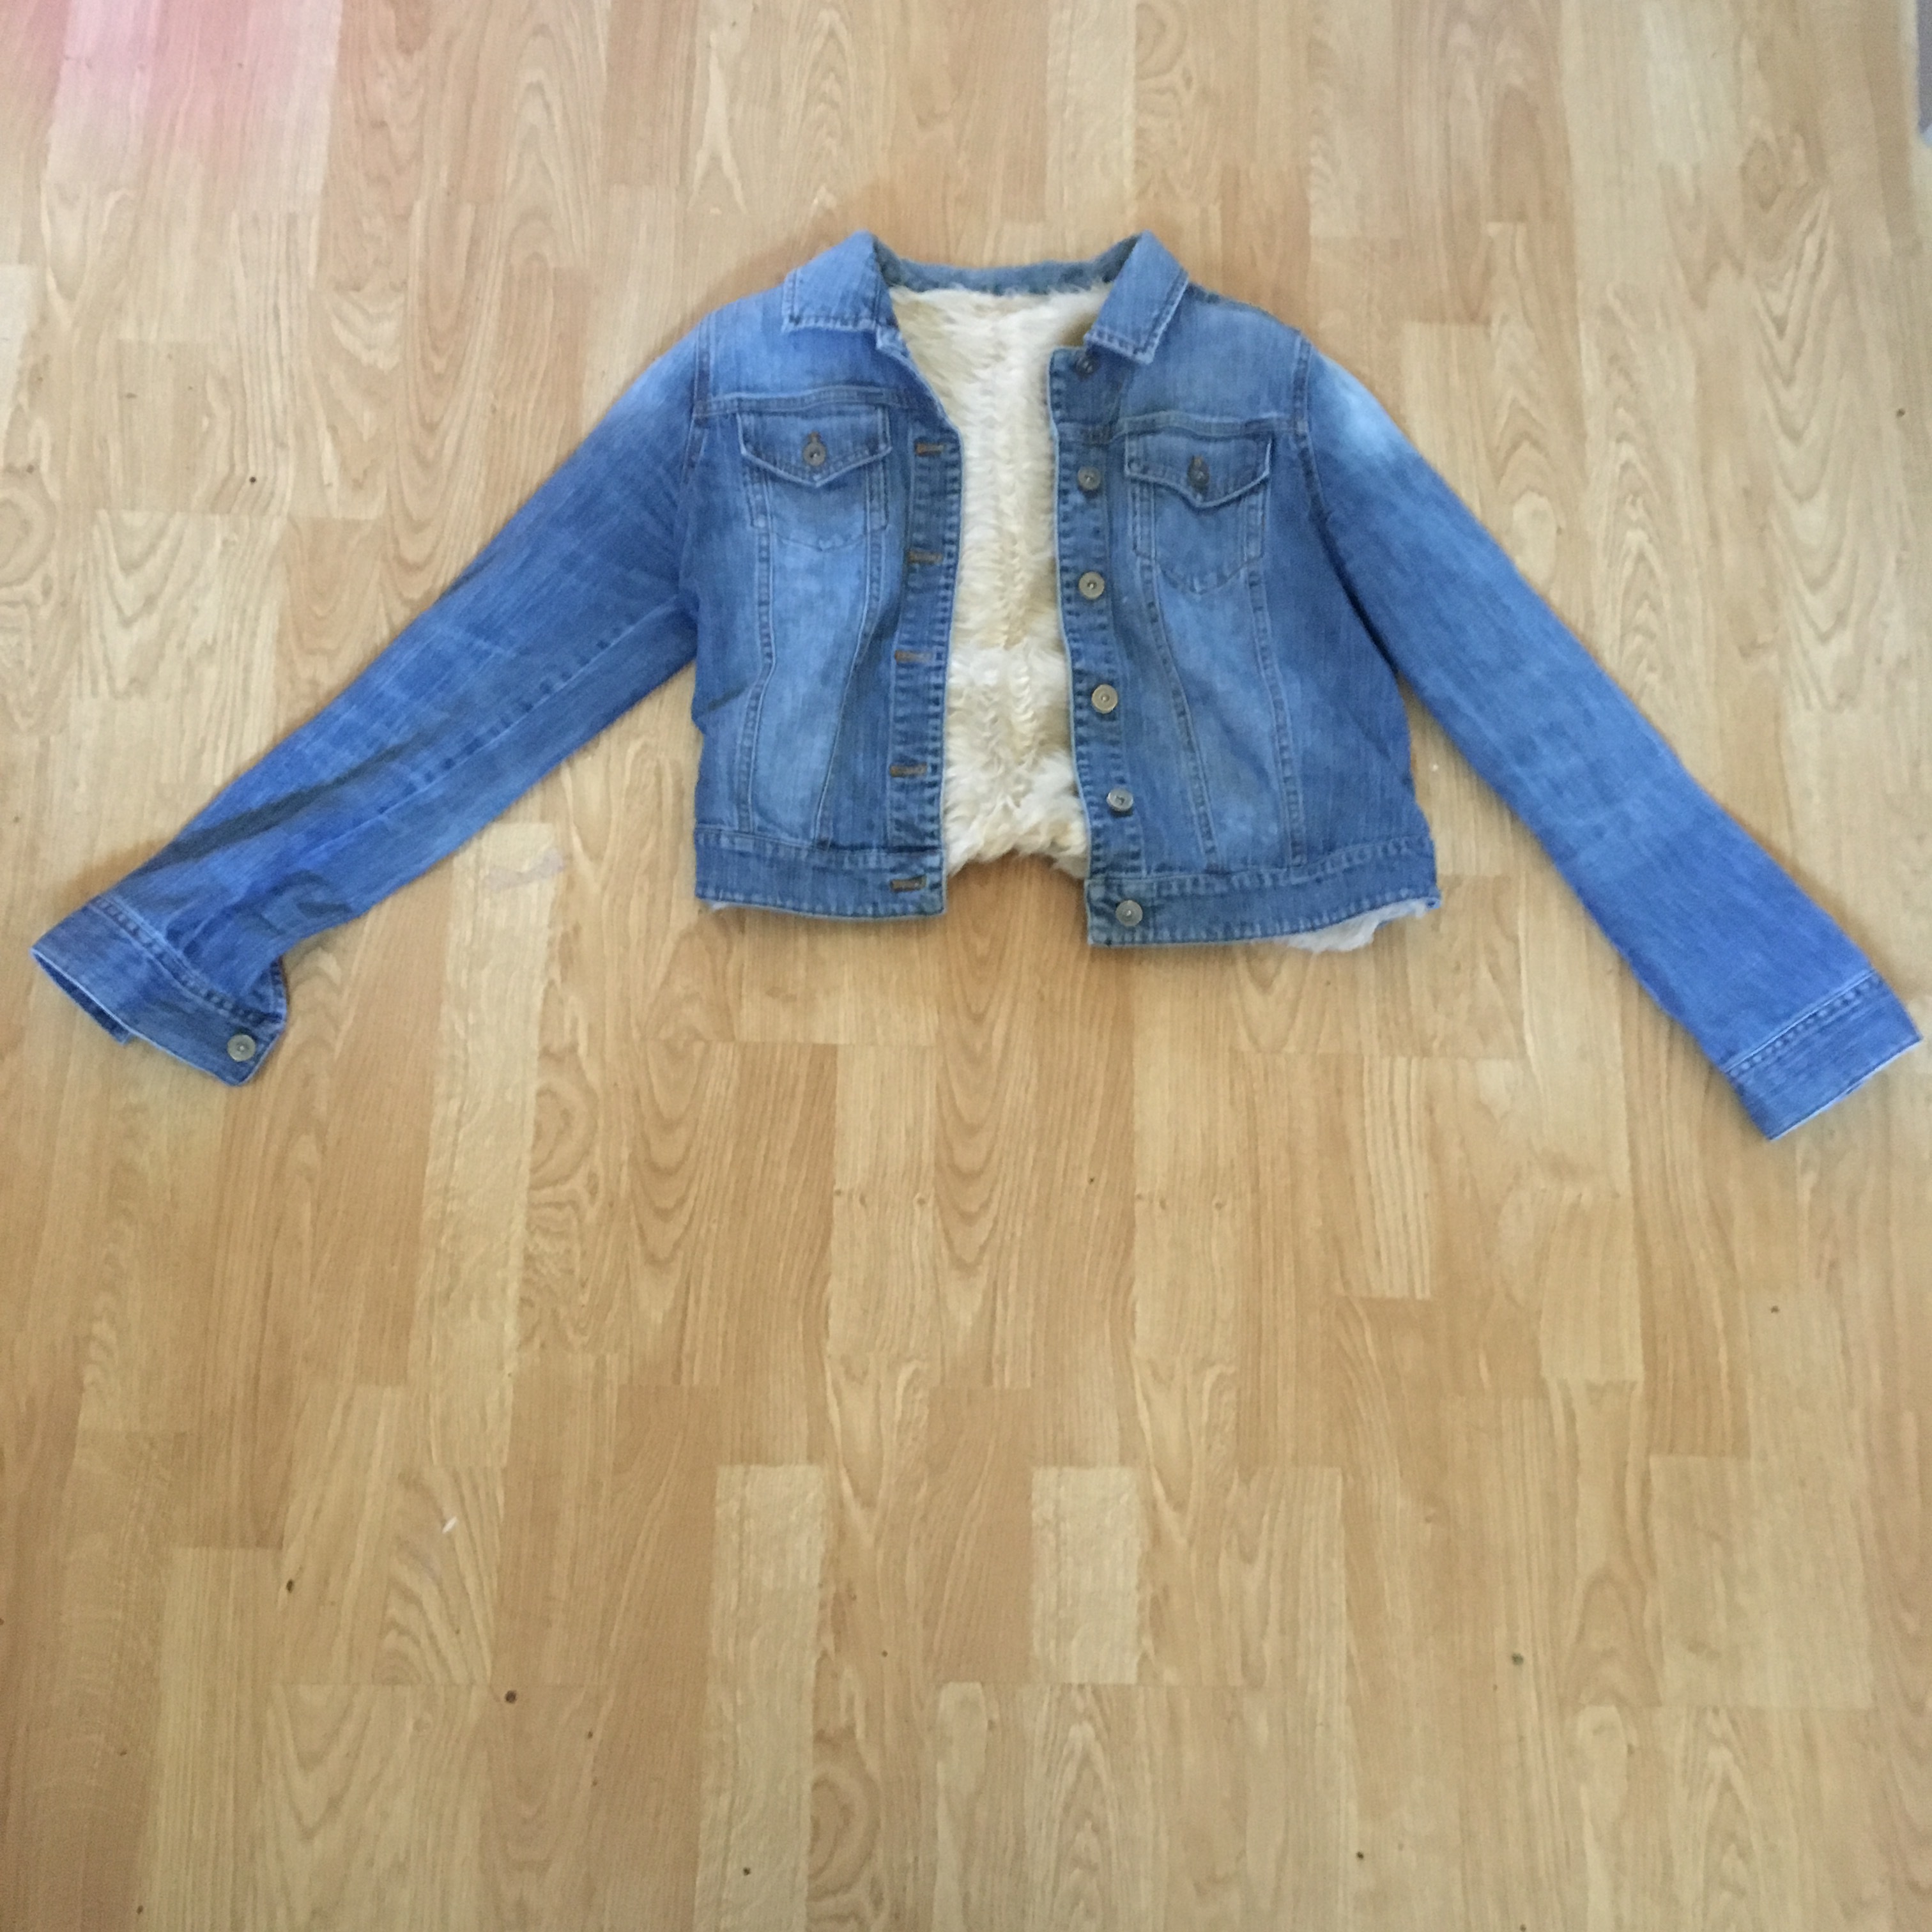 Nordstrom BP Denim Fur Jacket Available for Free Online Swapping :: Rehash